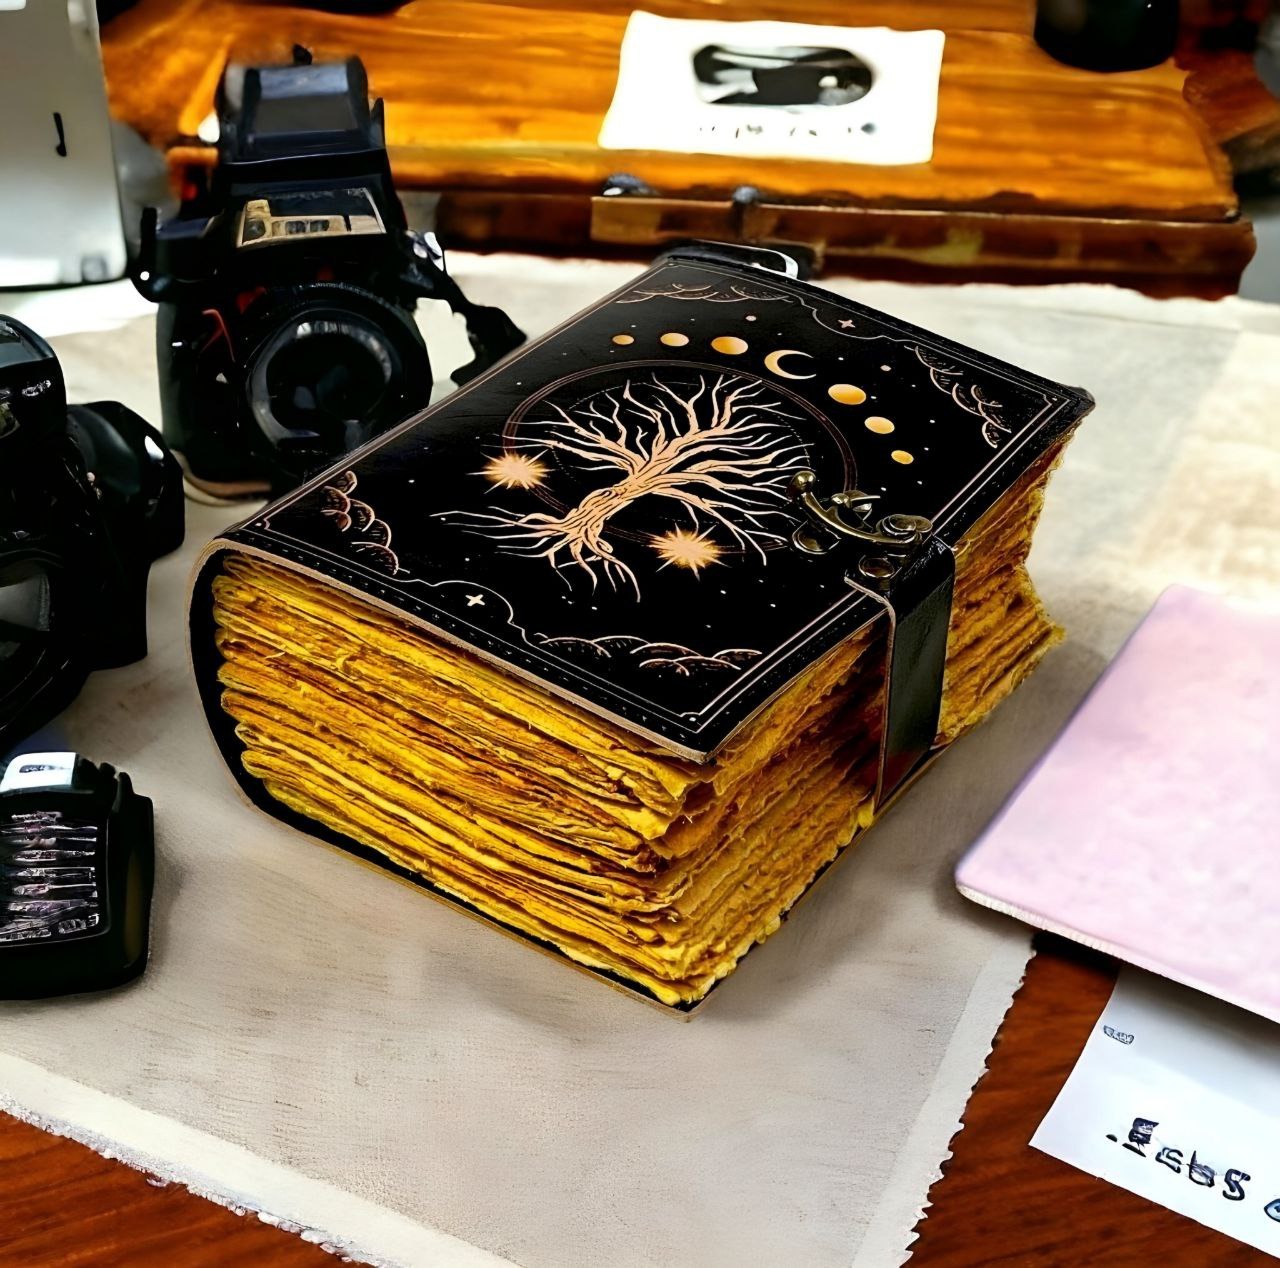 Tree of life vintage leather journal with handmade deckle edge 400 pages gifts  - $48.43